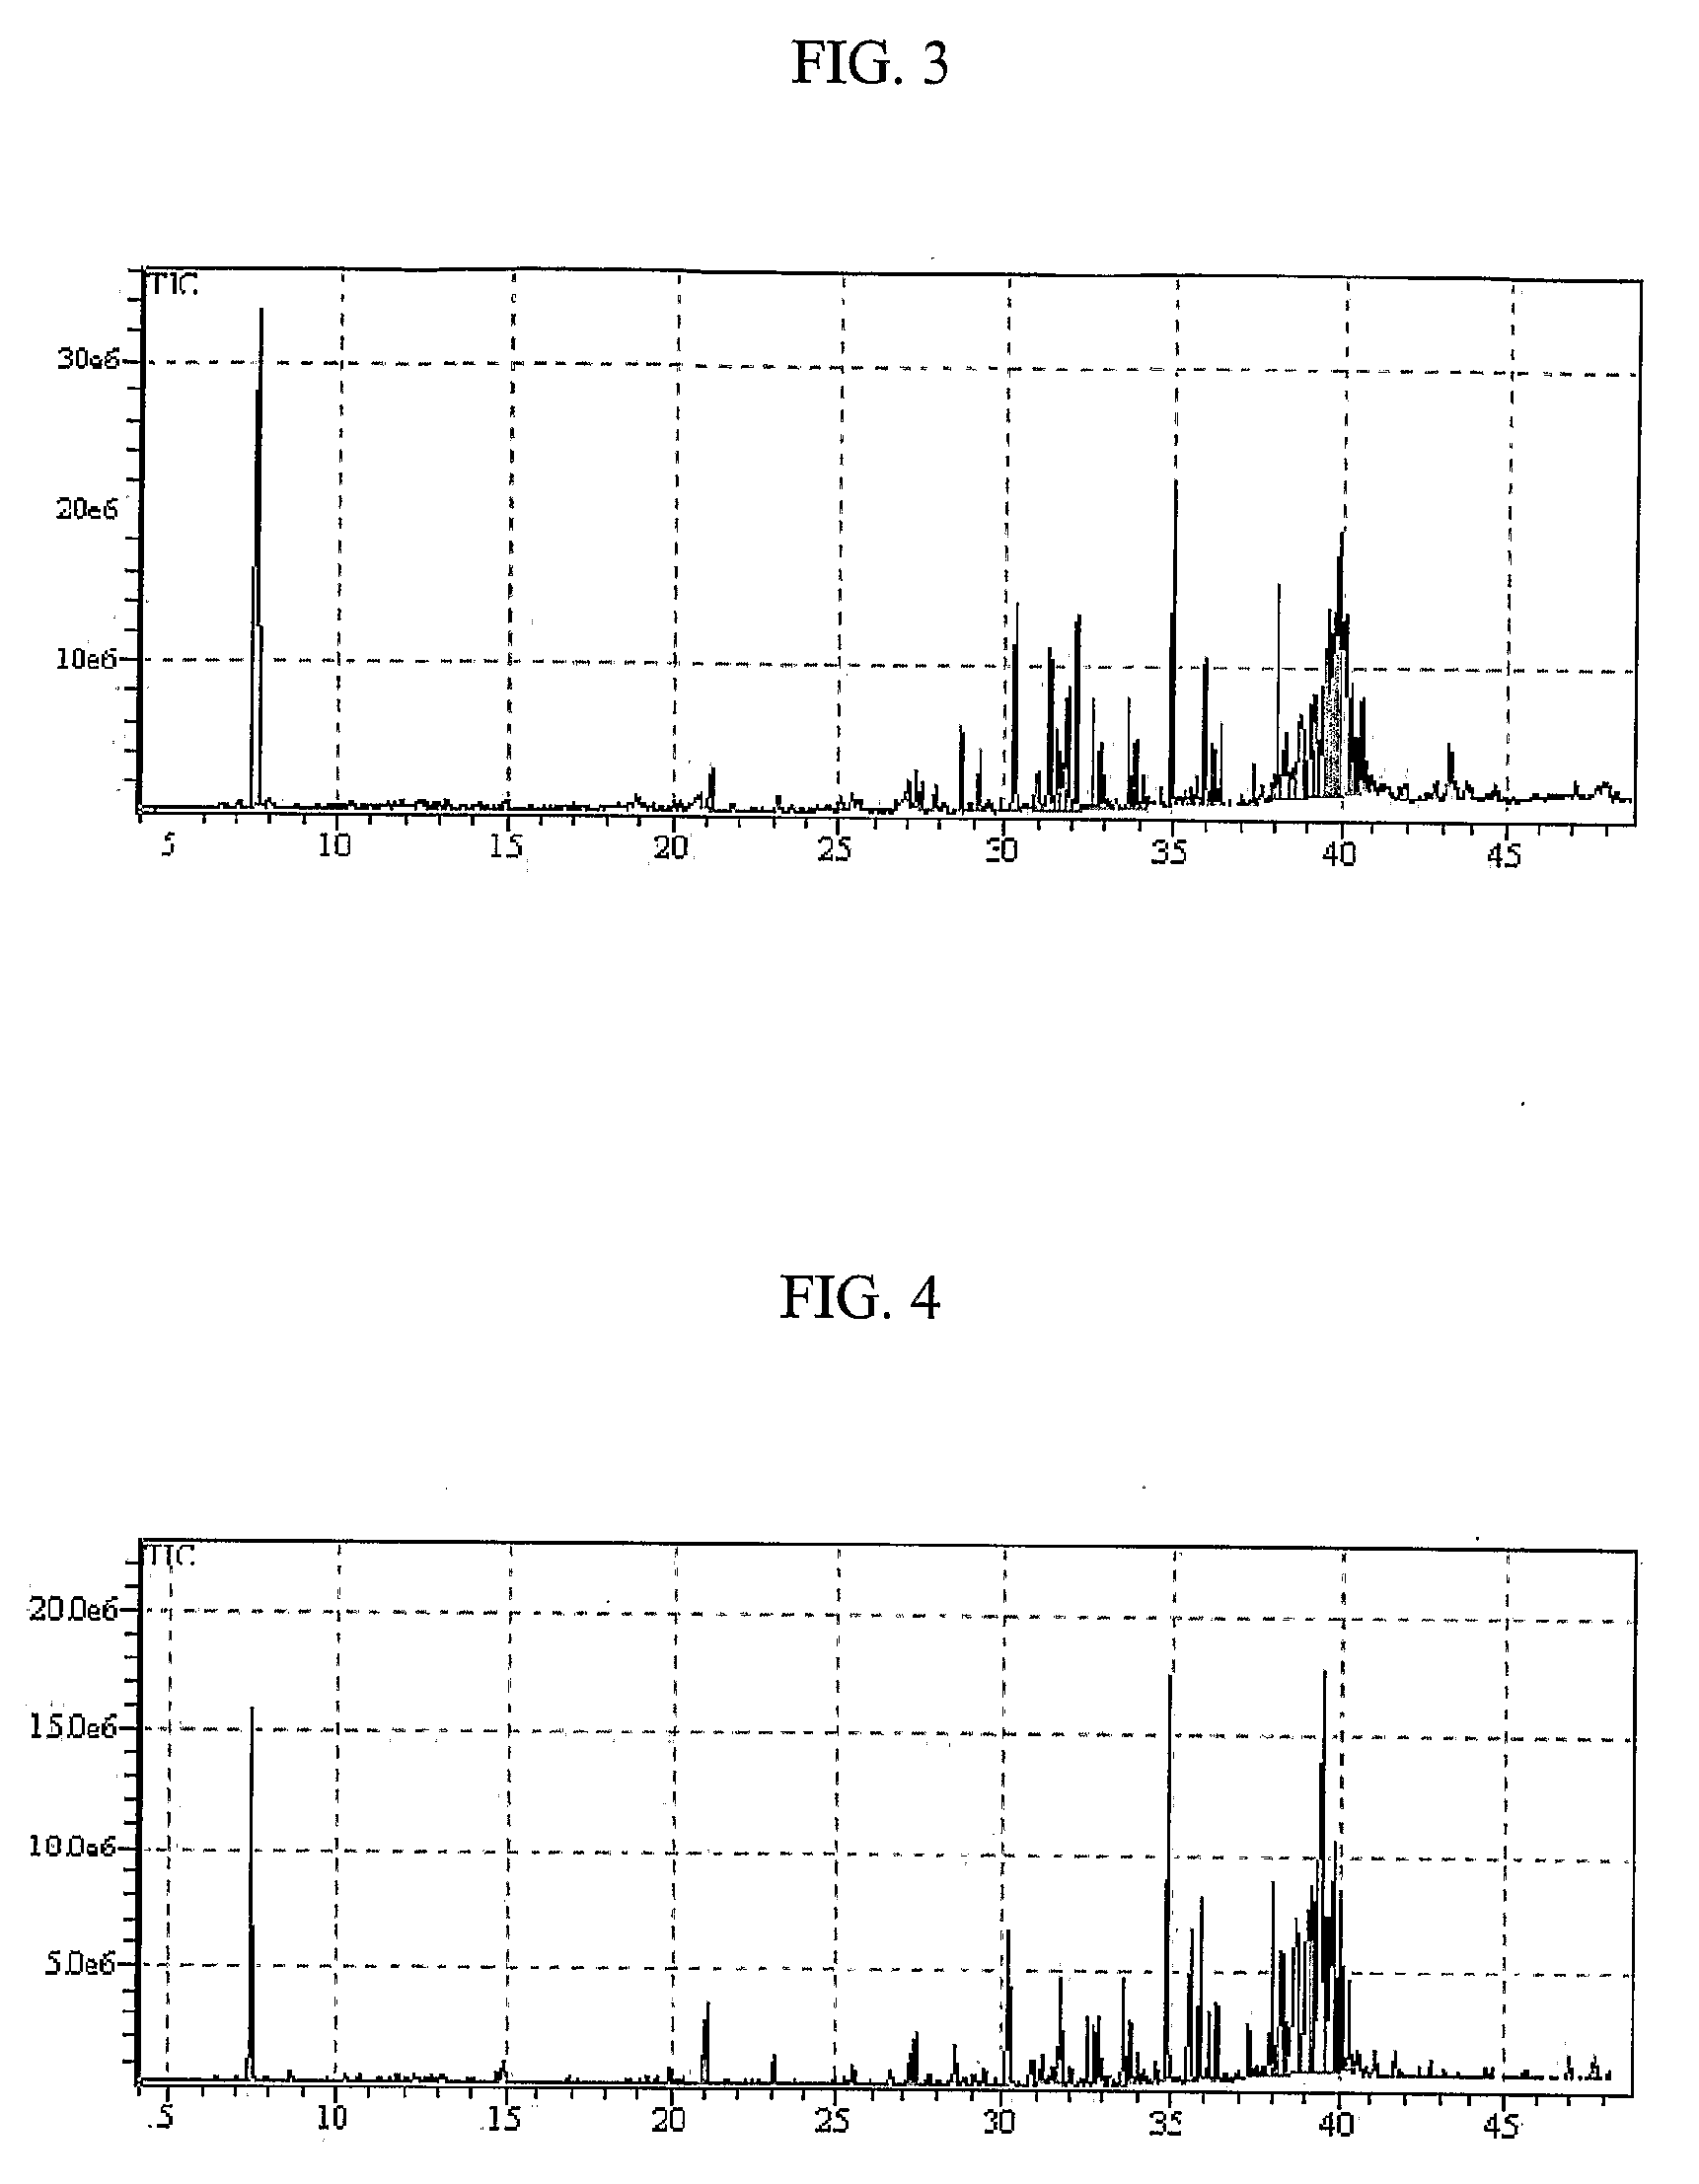 Bacterial Consortium Nbc2000 and Method for Biologically Treating Endocrine Disrupters Using the Nbc2000